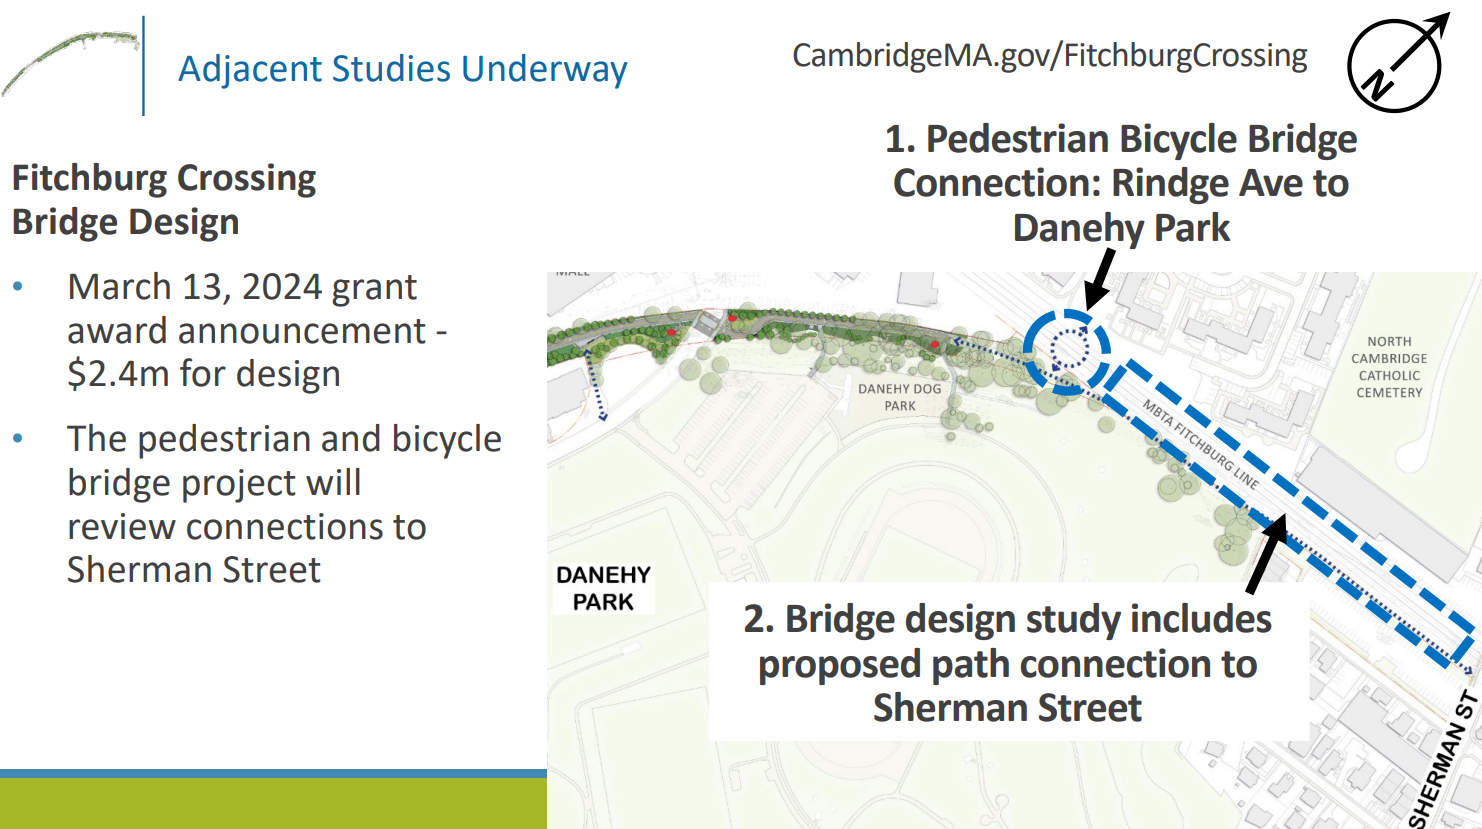 Project Map of Fitchburg Crossing Bridge Design. From left to right, 2-D map shows Danehy Park, Danehy Dog Park, MBTA Fitchburg Line, North Cambridge Catholic Cemetery, and Sherman Street. Map shows project plan for pedestrian bicycle bridge connection between Rindge Avenue and Danehy Park and a proposed path connection to Sherman Street indicated by blue dotted lines.